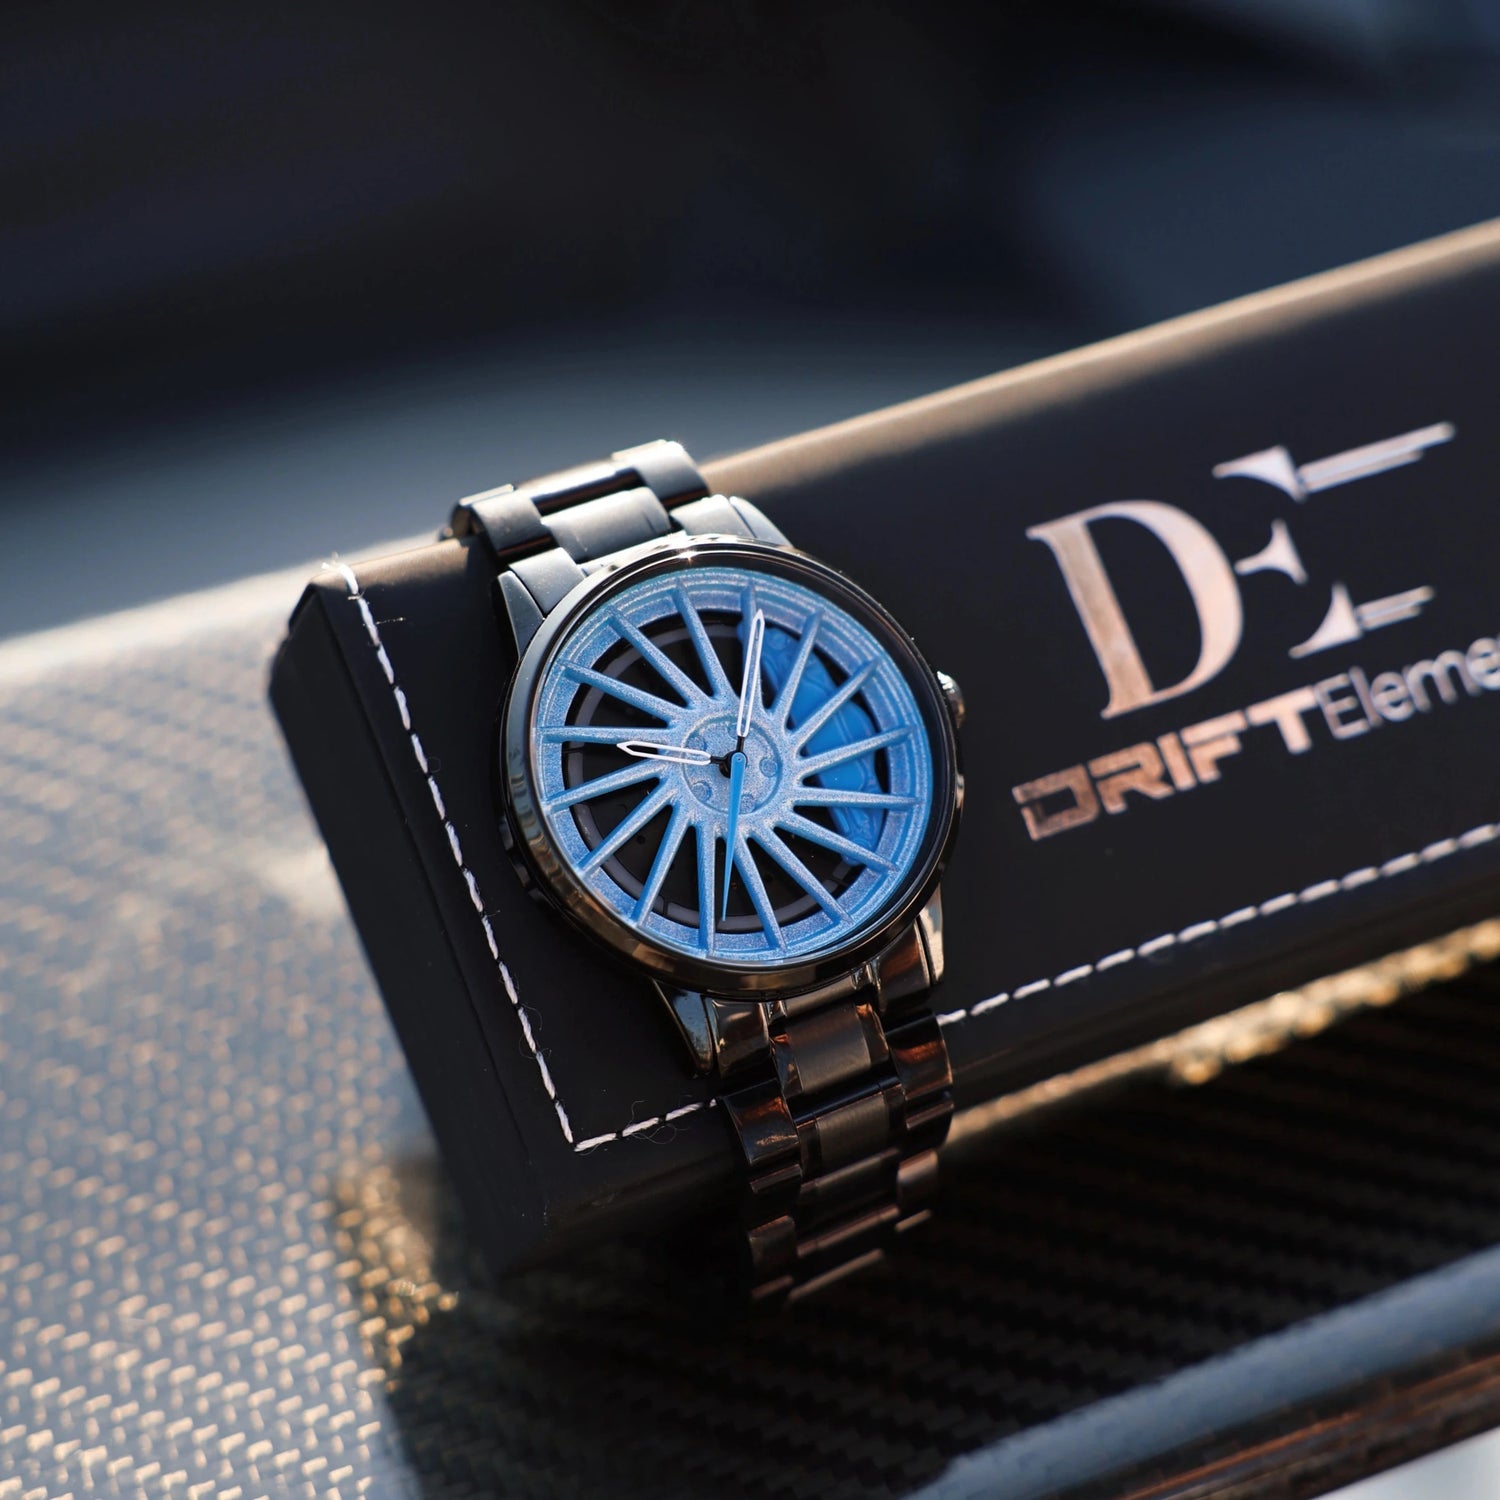 Get the limited edition DriftElement Rim Watch in Skyblue now! ⌚💫 #StyleYourOutfit